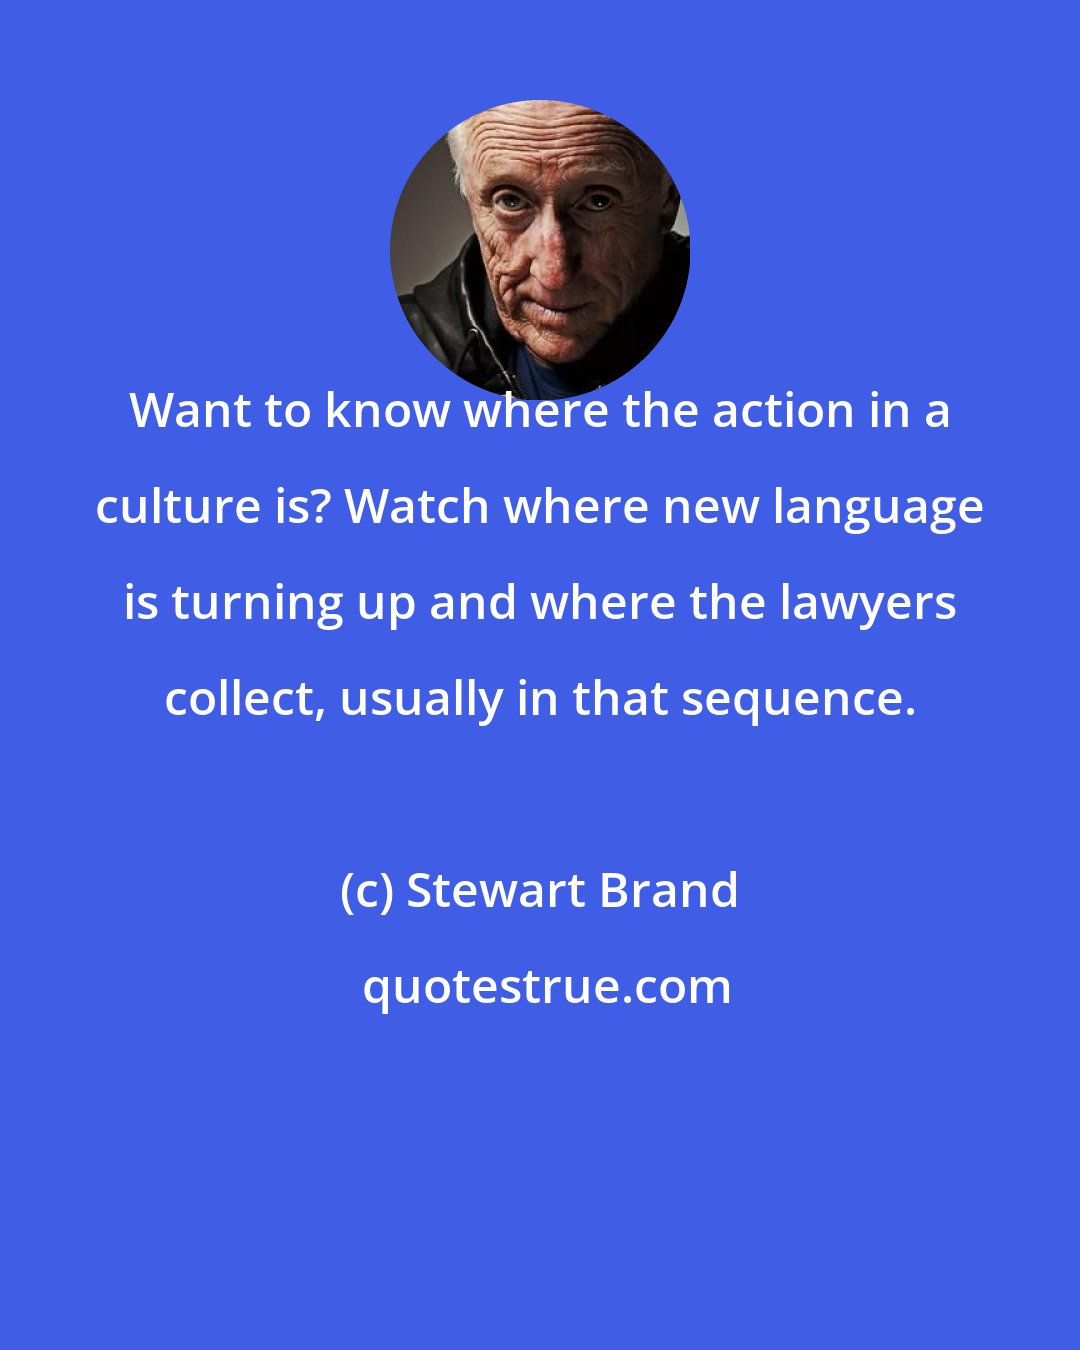 Stewart Brand: Want to know where the action in a culture is? Watch where new language is turning up and where the lawyers collect, usually in that sequence.